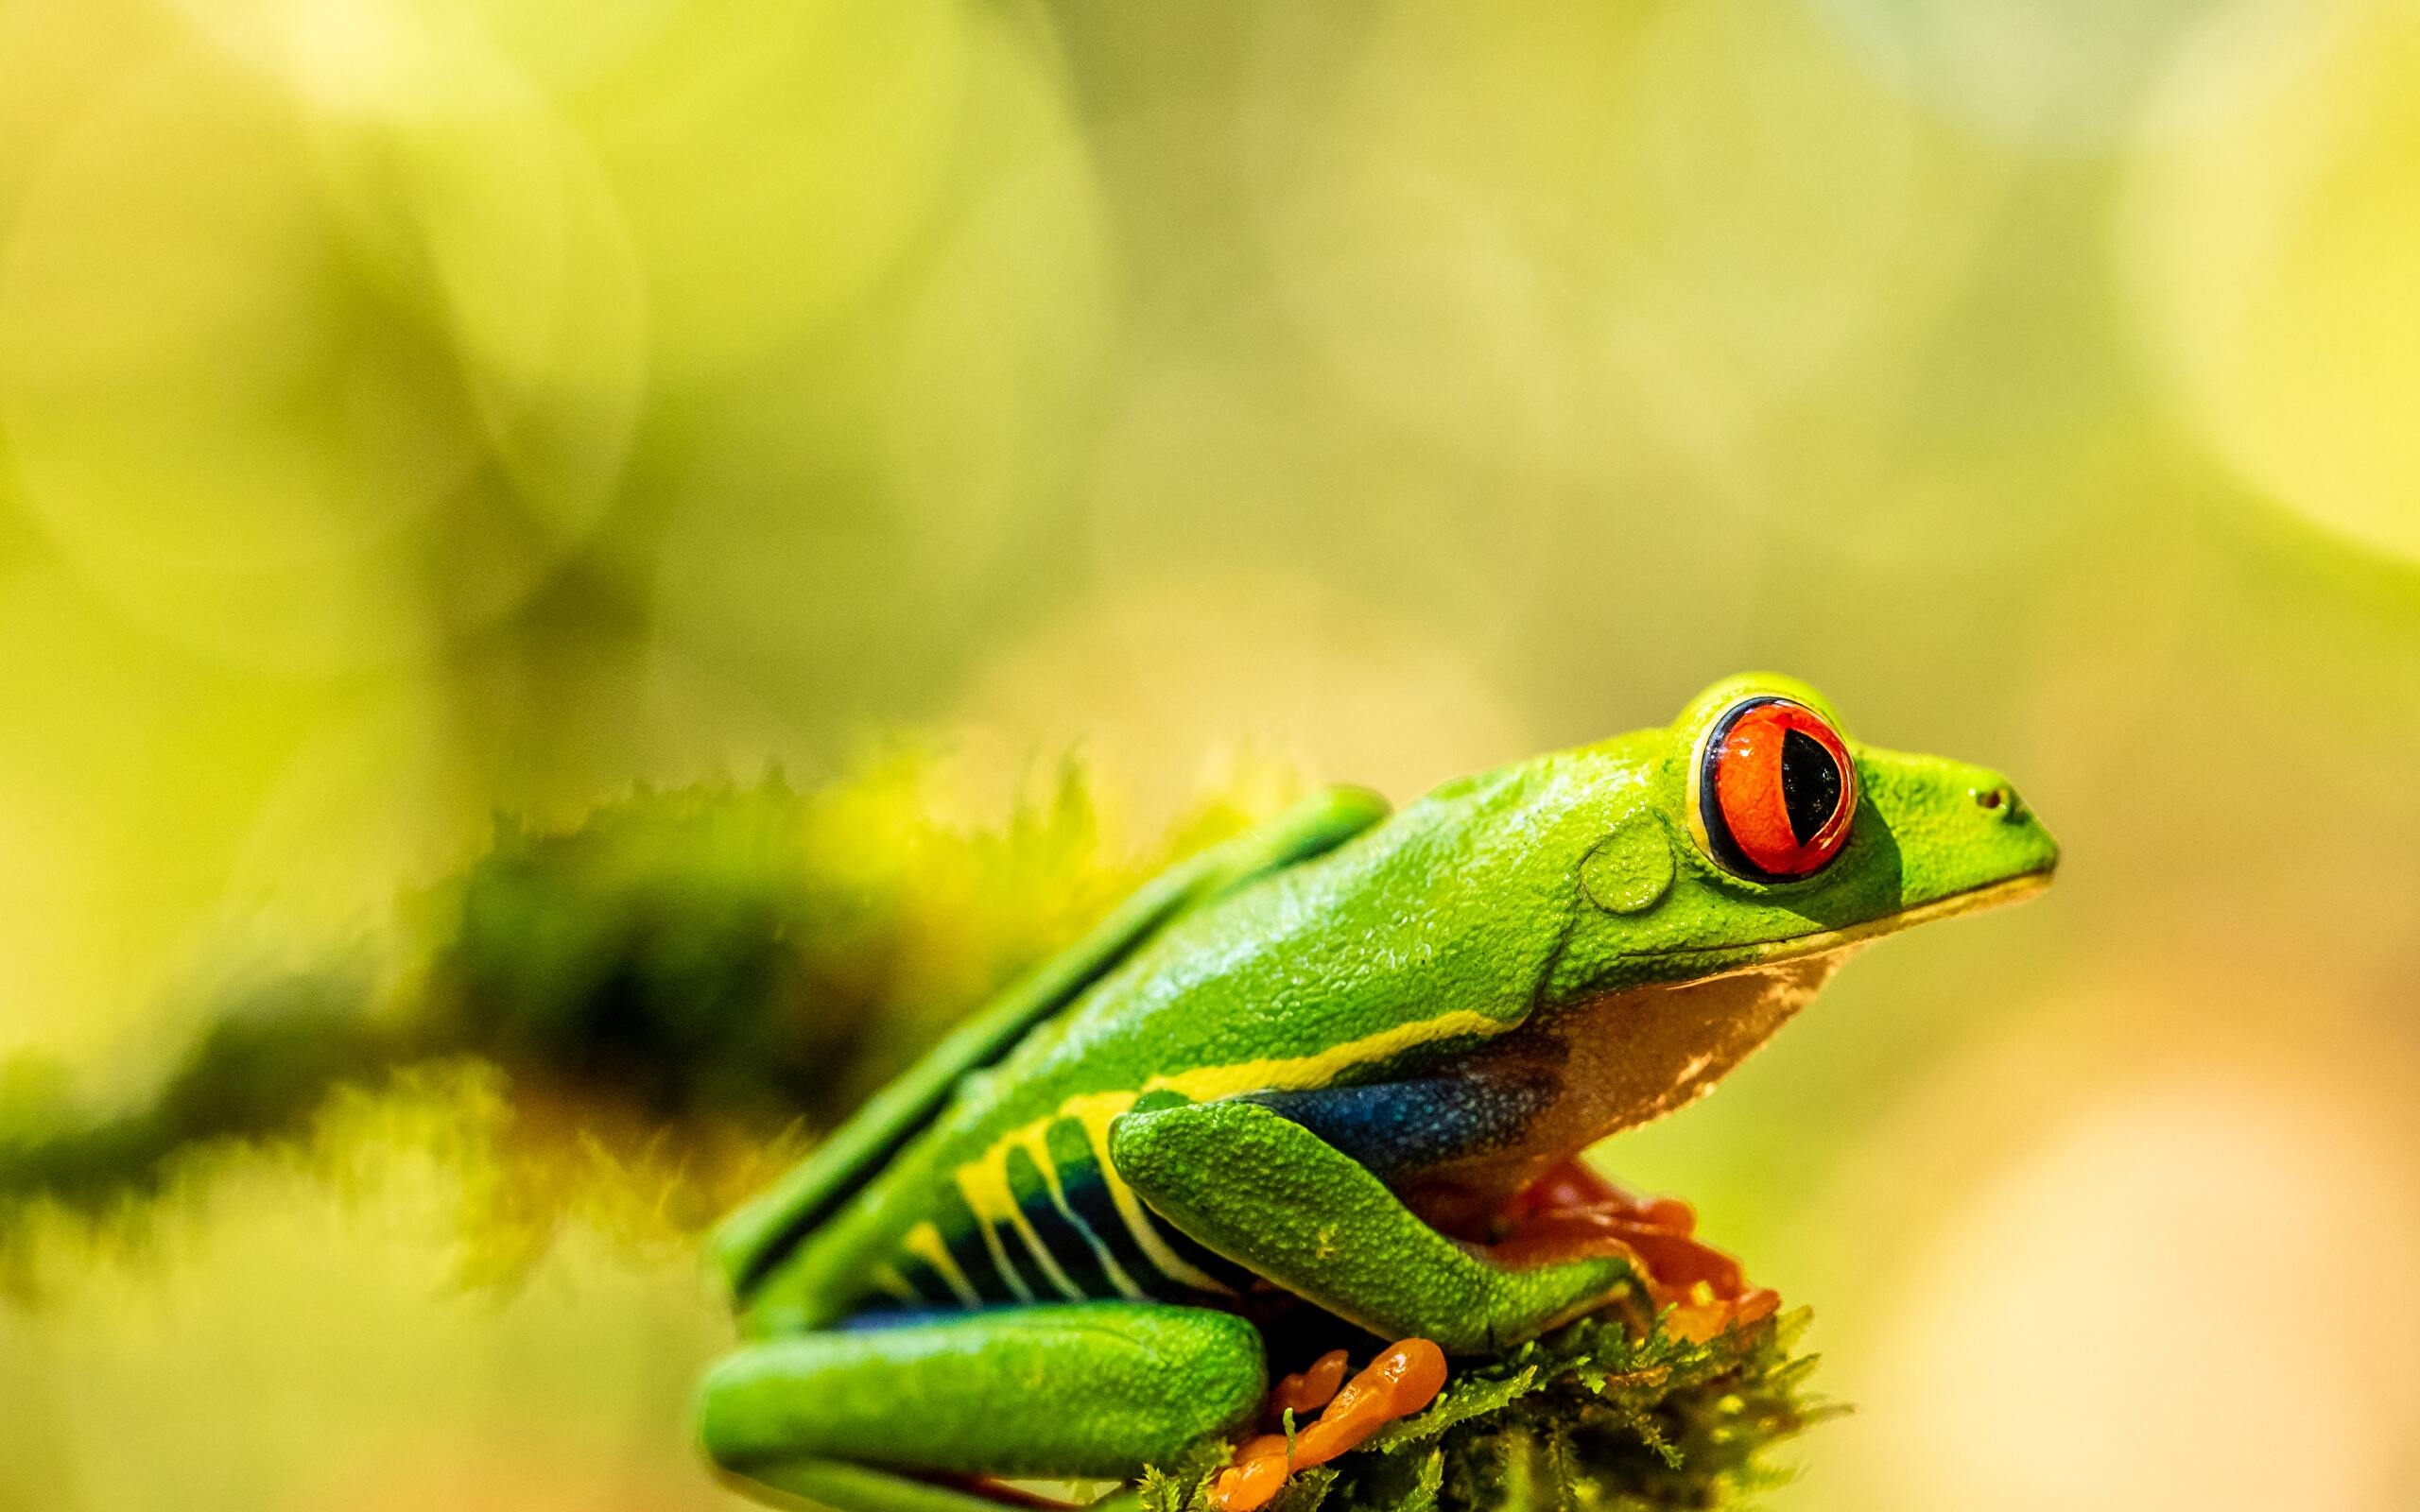 Frog 4K wallpaper for your desktop or mobile screen free and easy to download